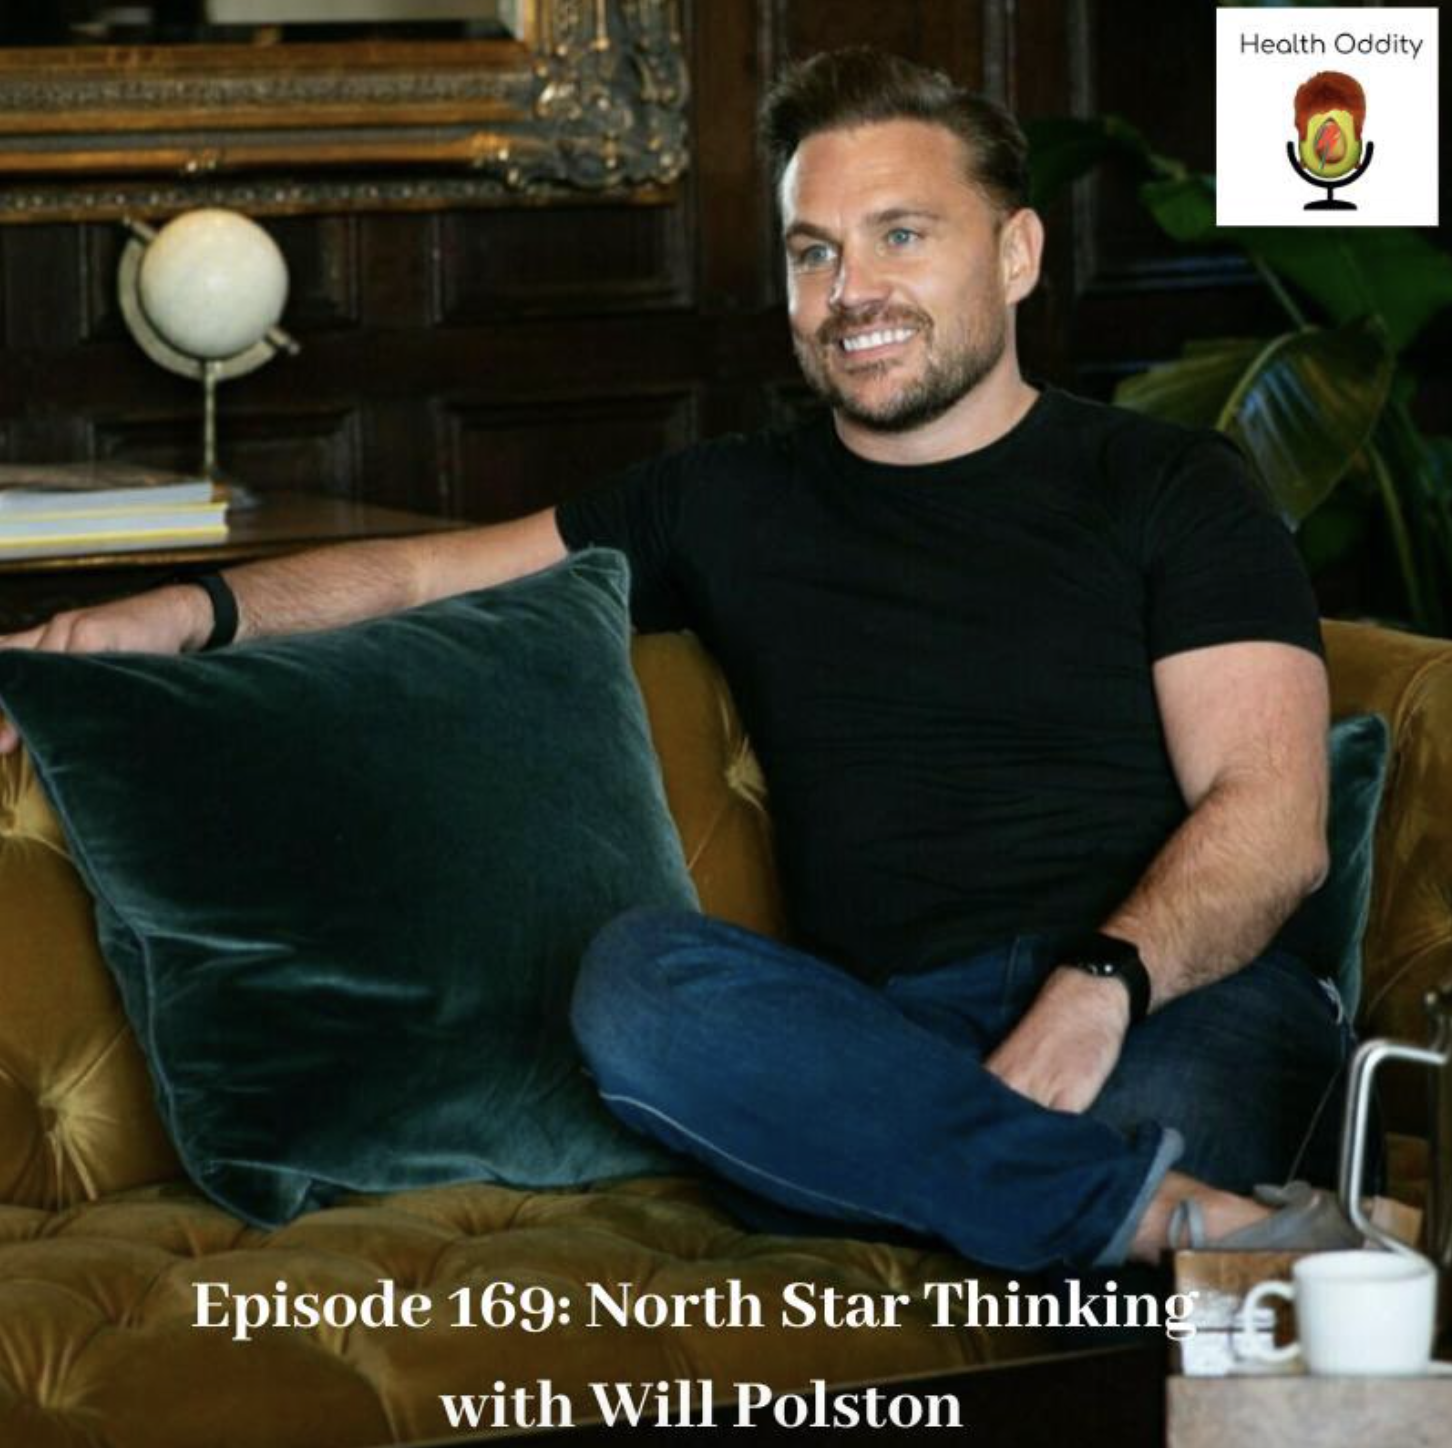 #169 North Star Thinking with Will Polston